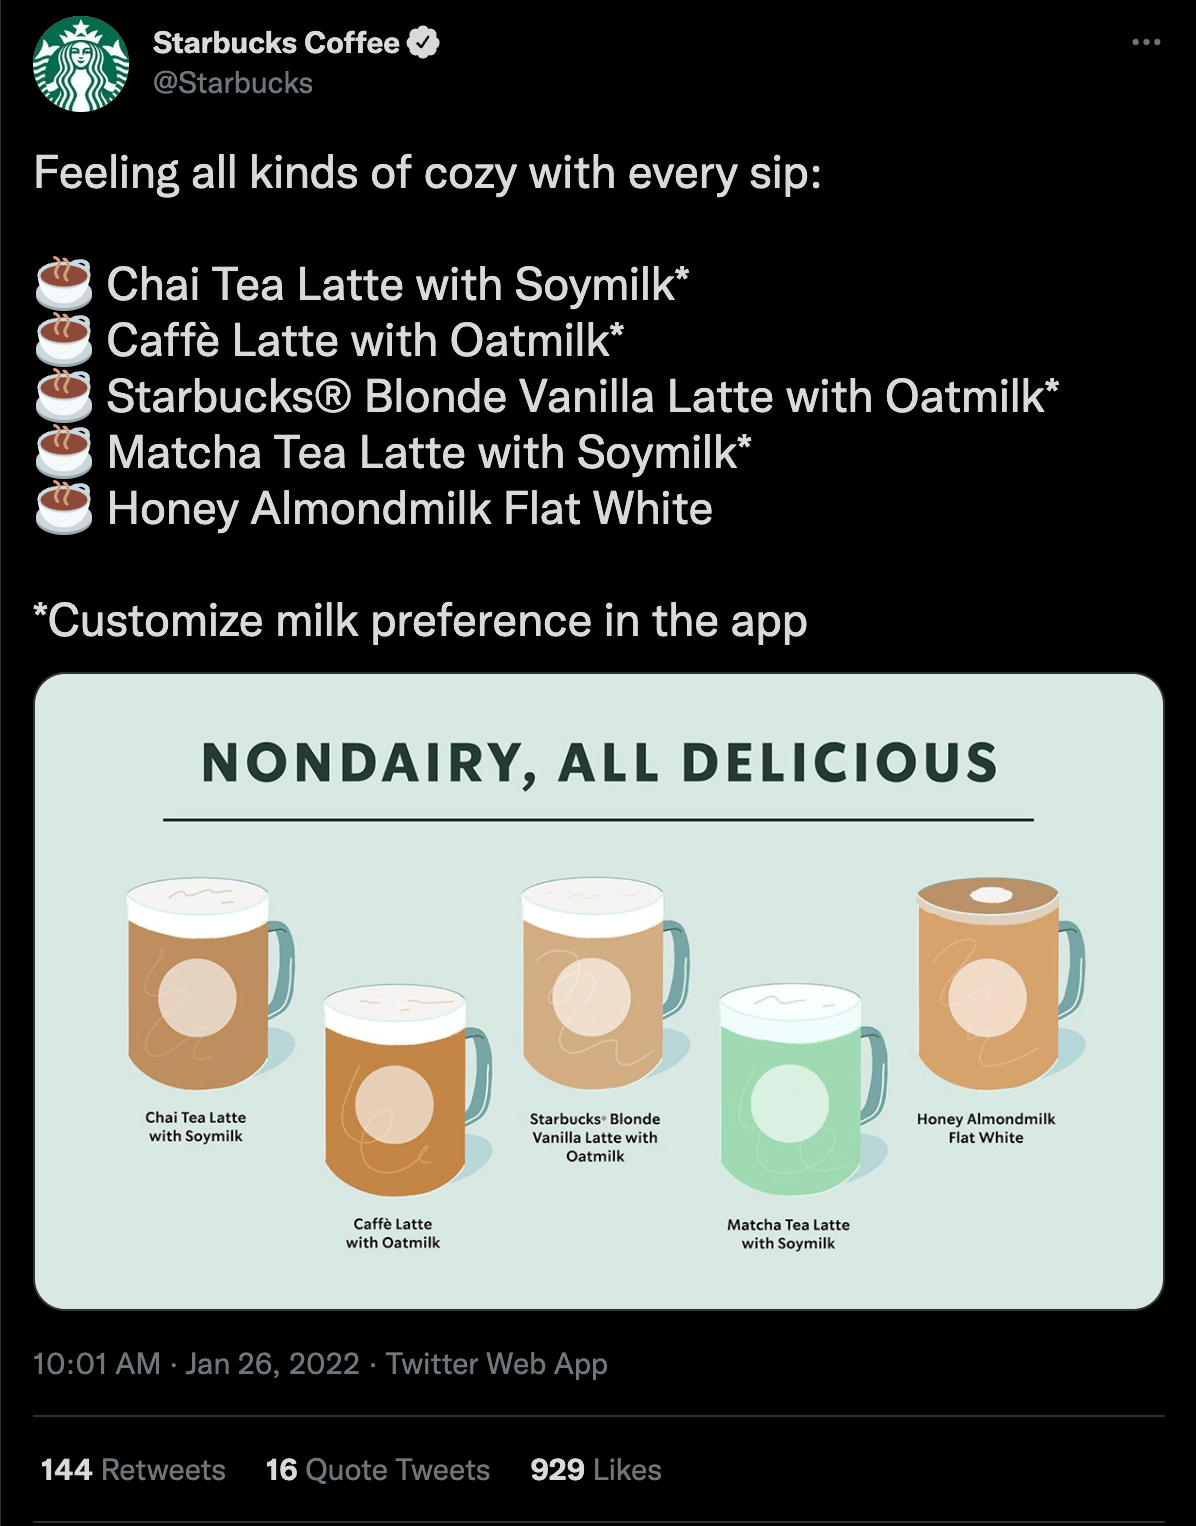 A tweet from Starbucks with an illustration of various drinks labeled with which non-dairy milk substitute they used